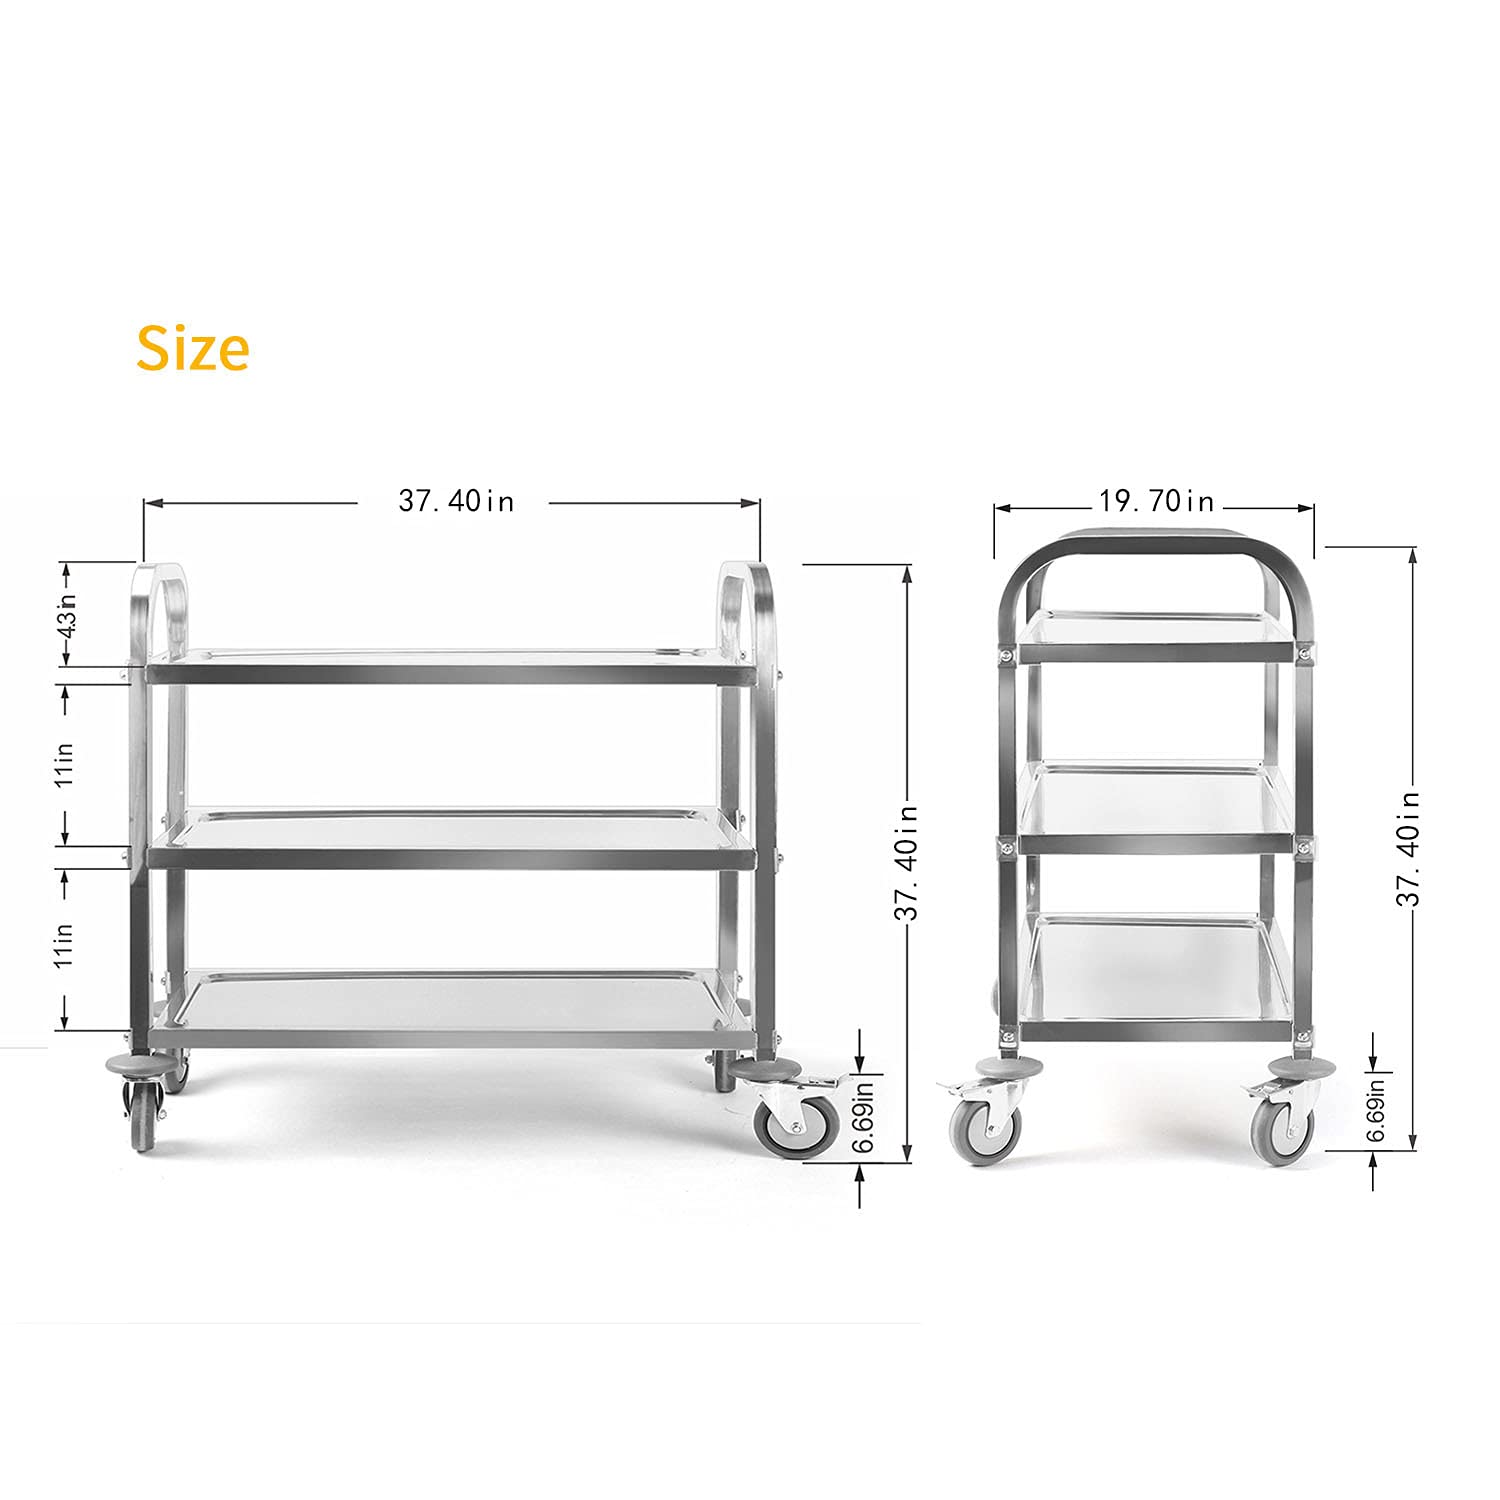 tonchean Large 3 Tier Stainless Steel Cart Kitchen Trolley Cart Serving Cart 37.4 x 19.7 x 37.4 Inch Kitchen Utility Rolling Cart Service Catering Storage Cart with Locking Wheels